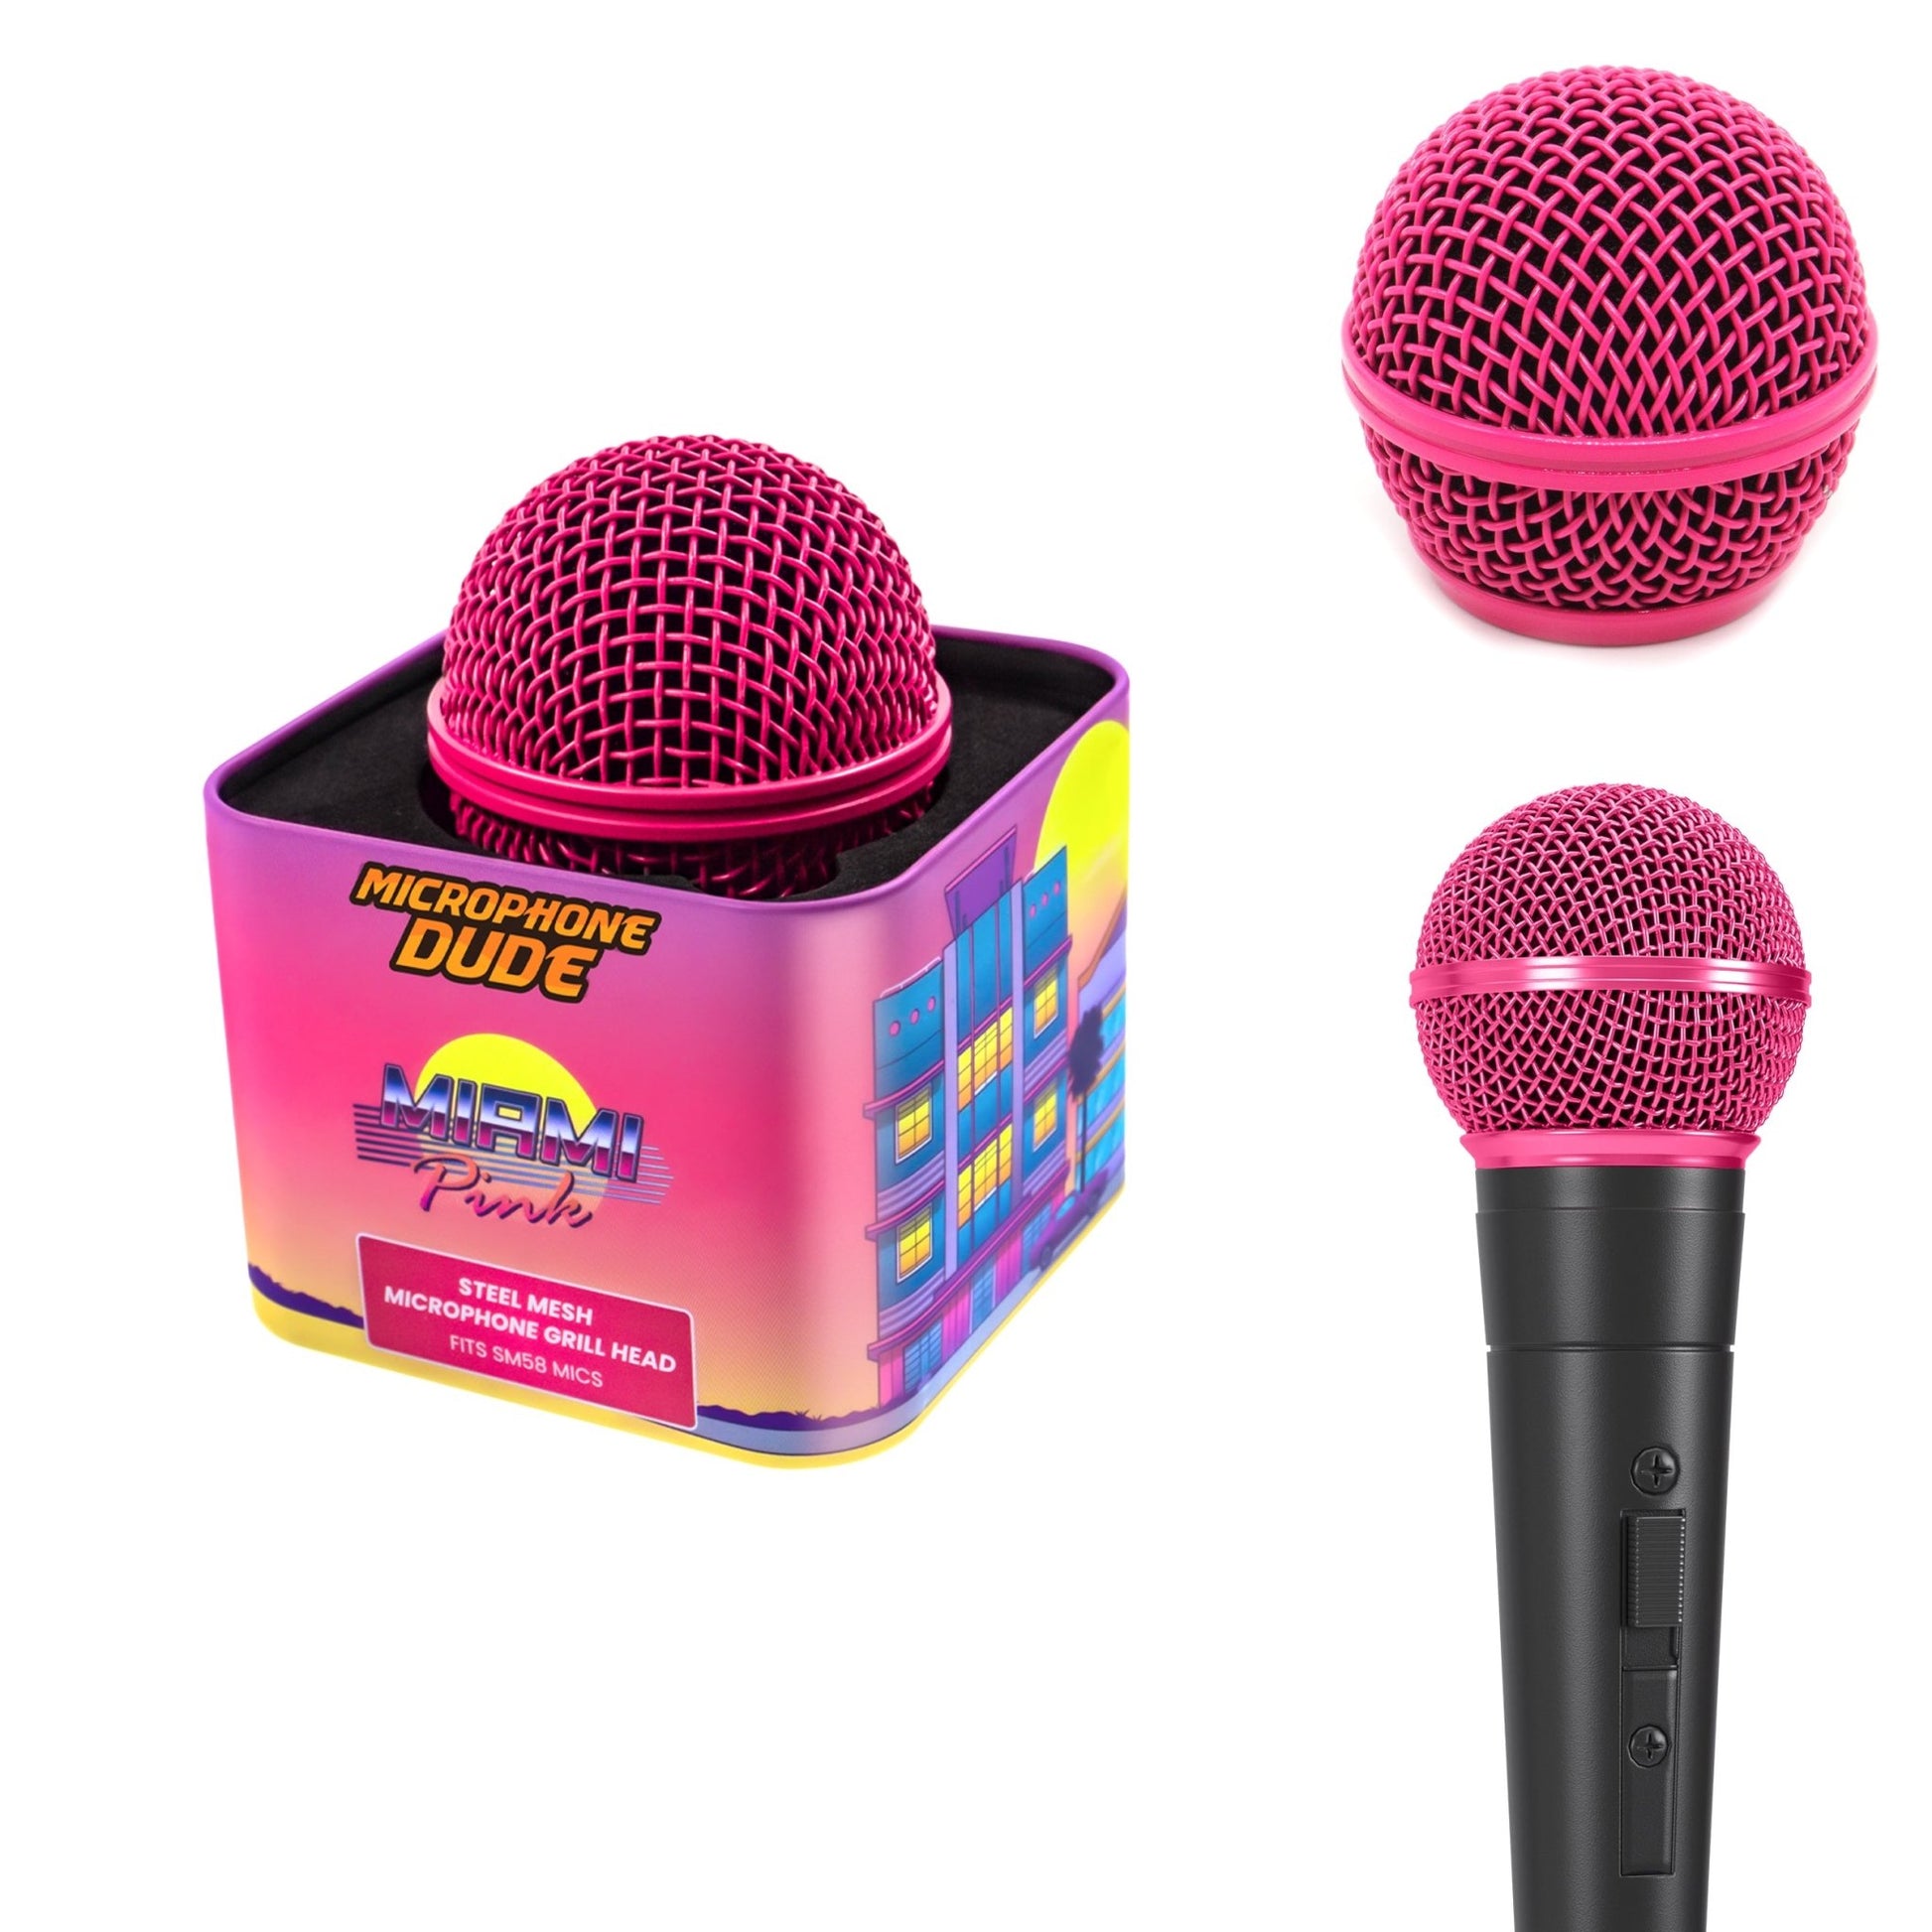 Miami Pink - SM58 Replacement Microphone Grille - Microphone Dude